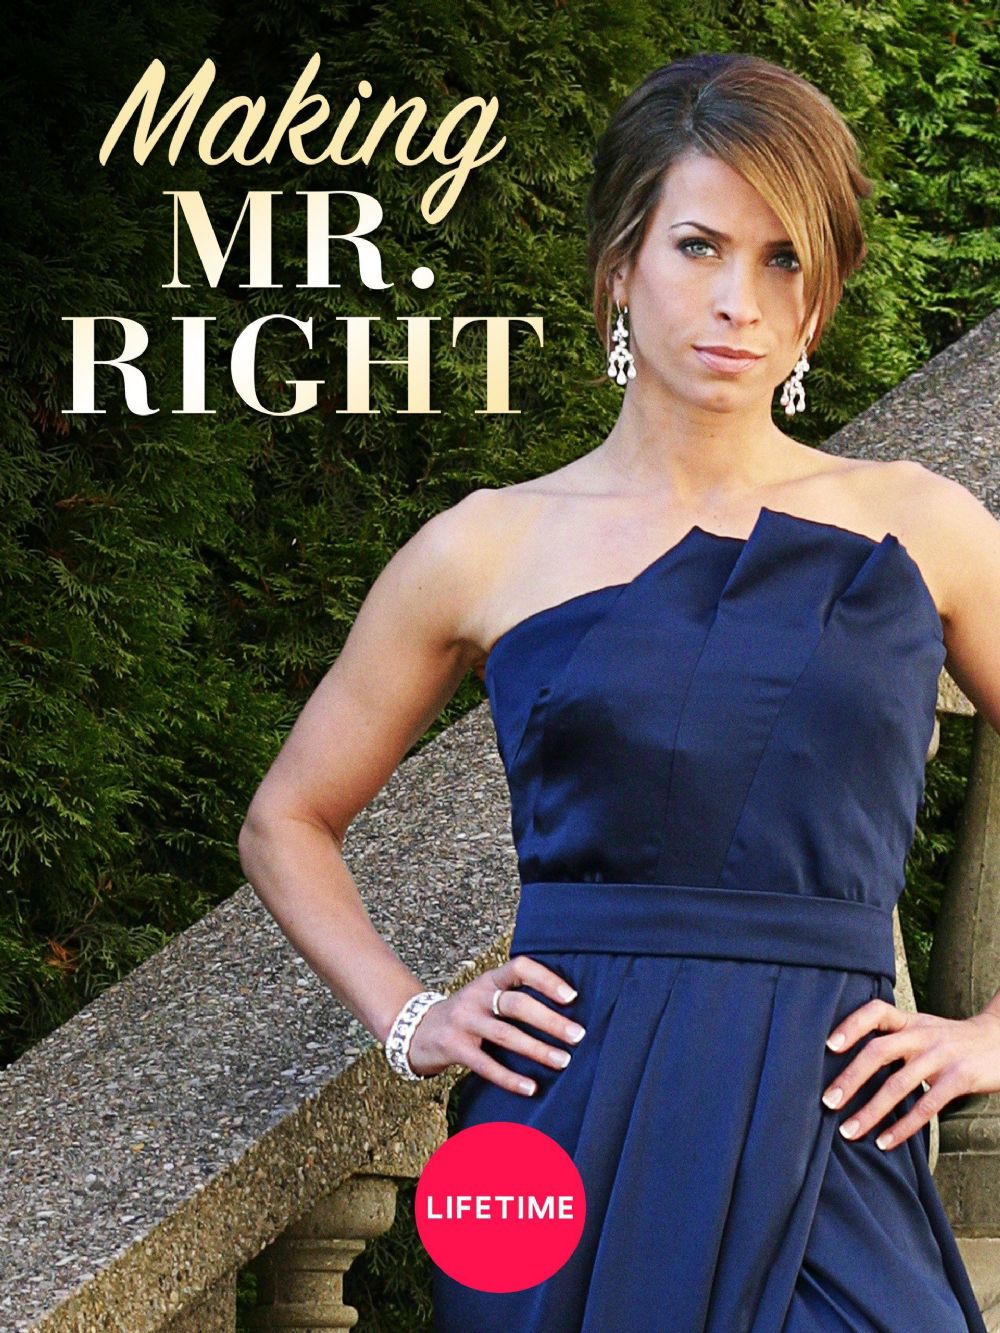 watch making mr right 2008 online free